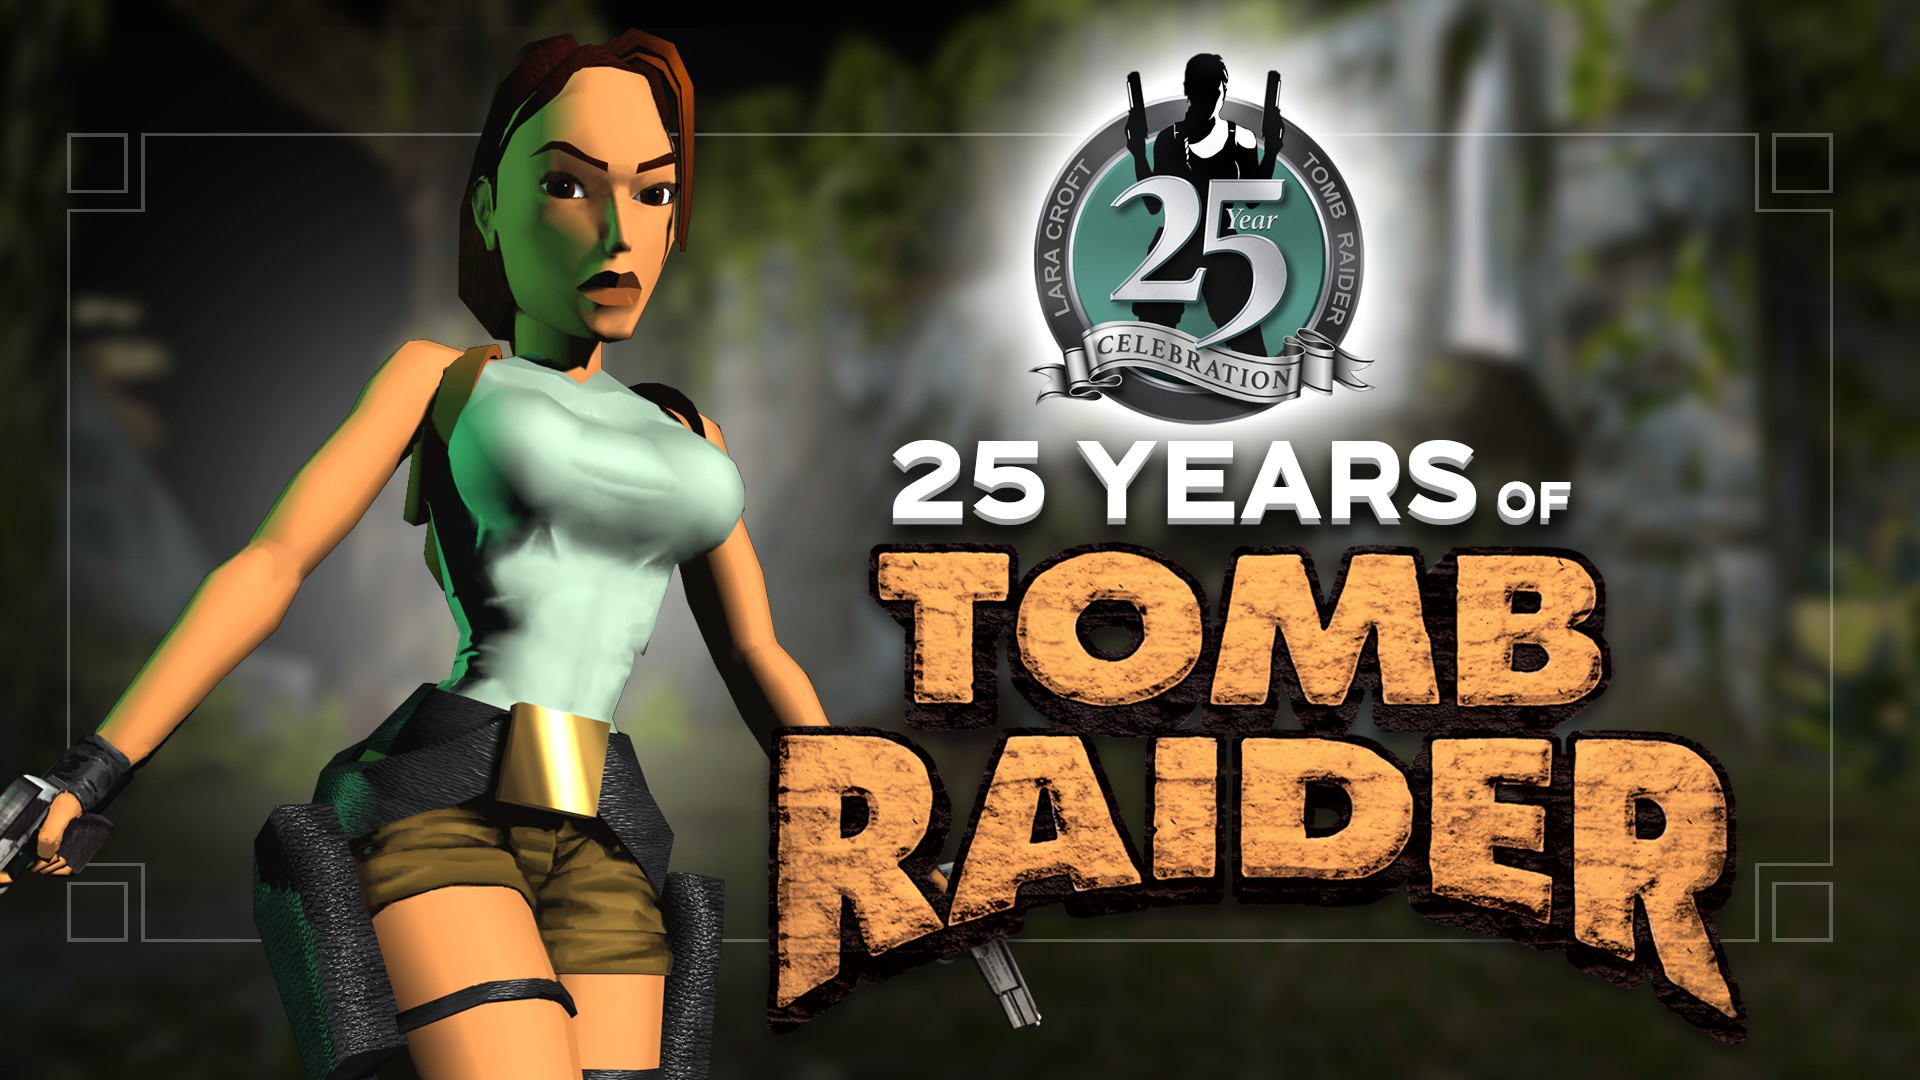 Rise of the Tomb Raider: 20 Year Celebration - Xbox Wire